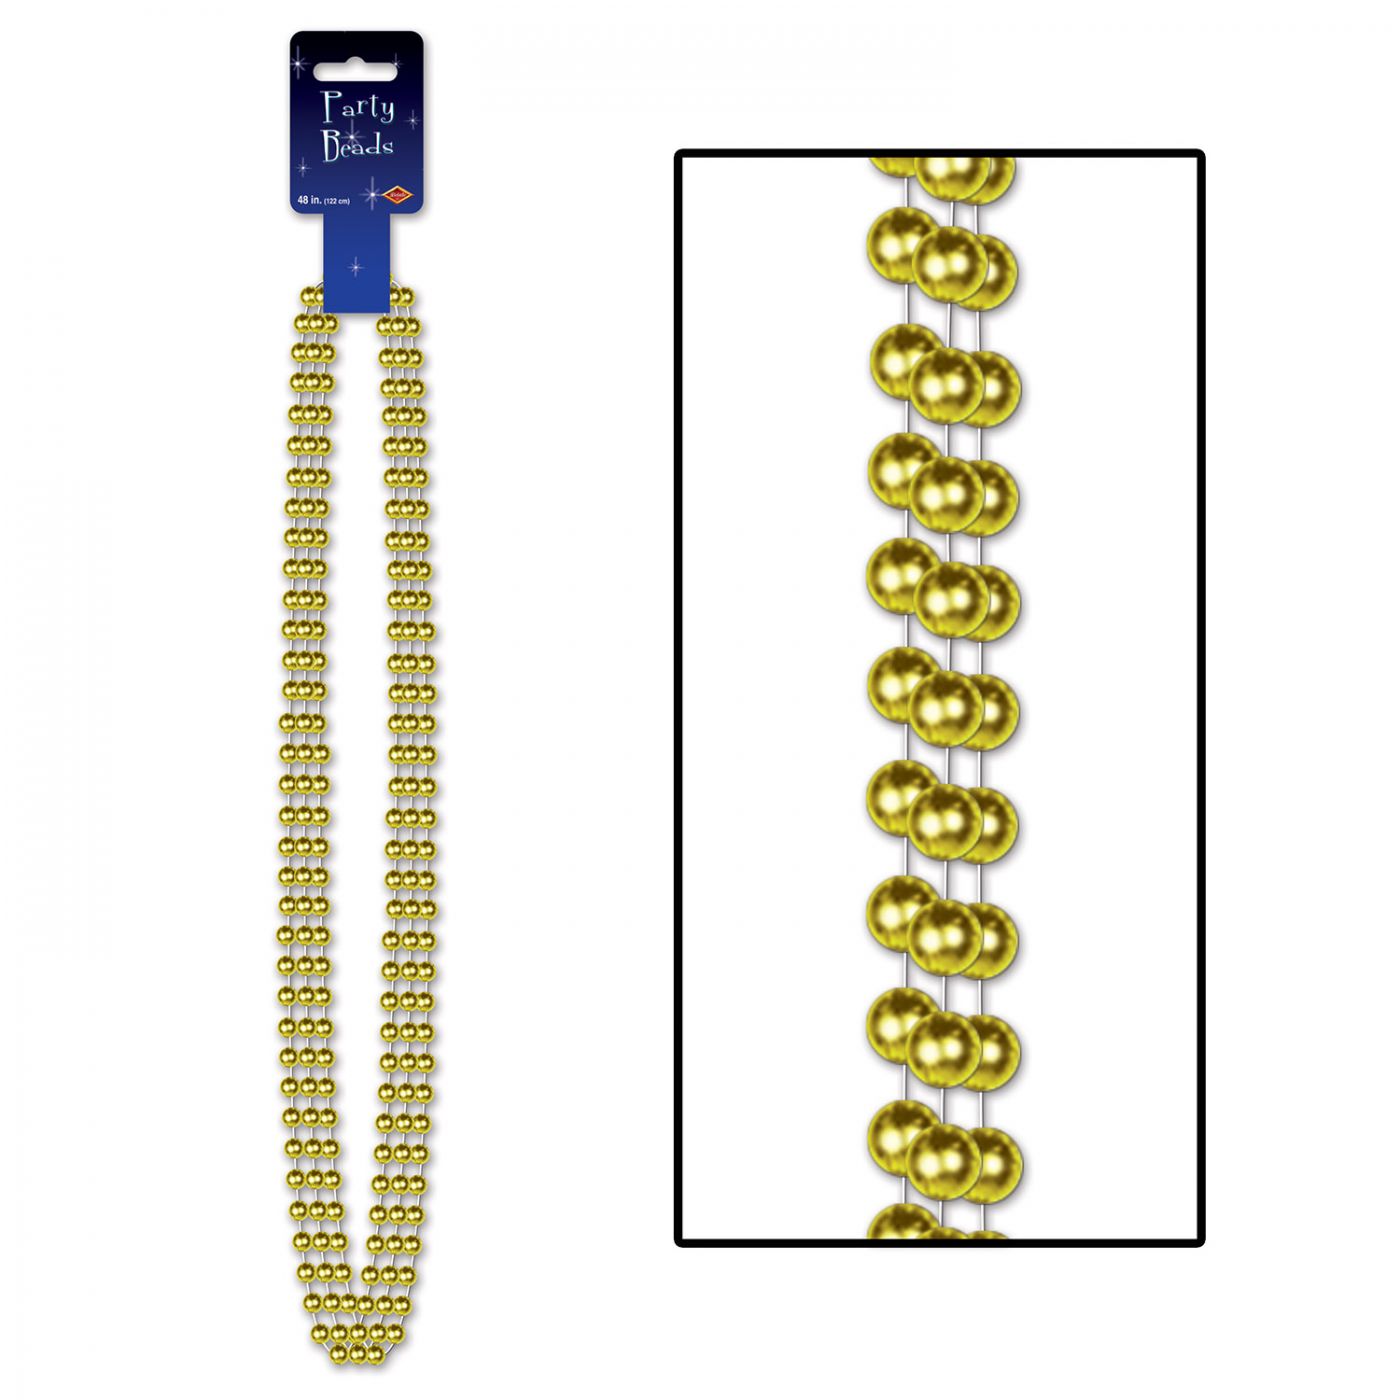 Party Beads - Large Round image